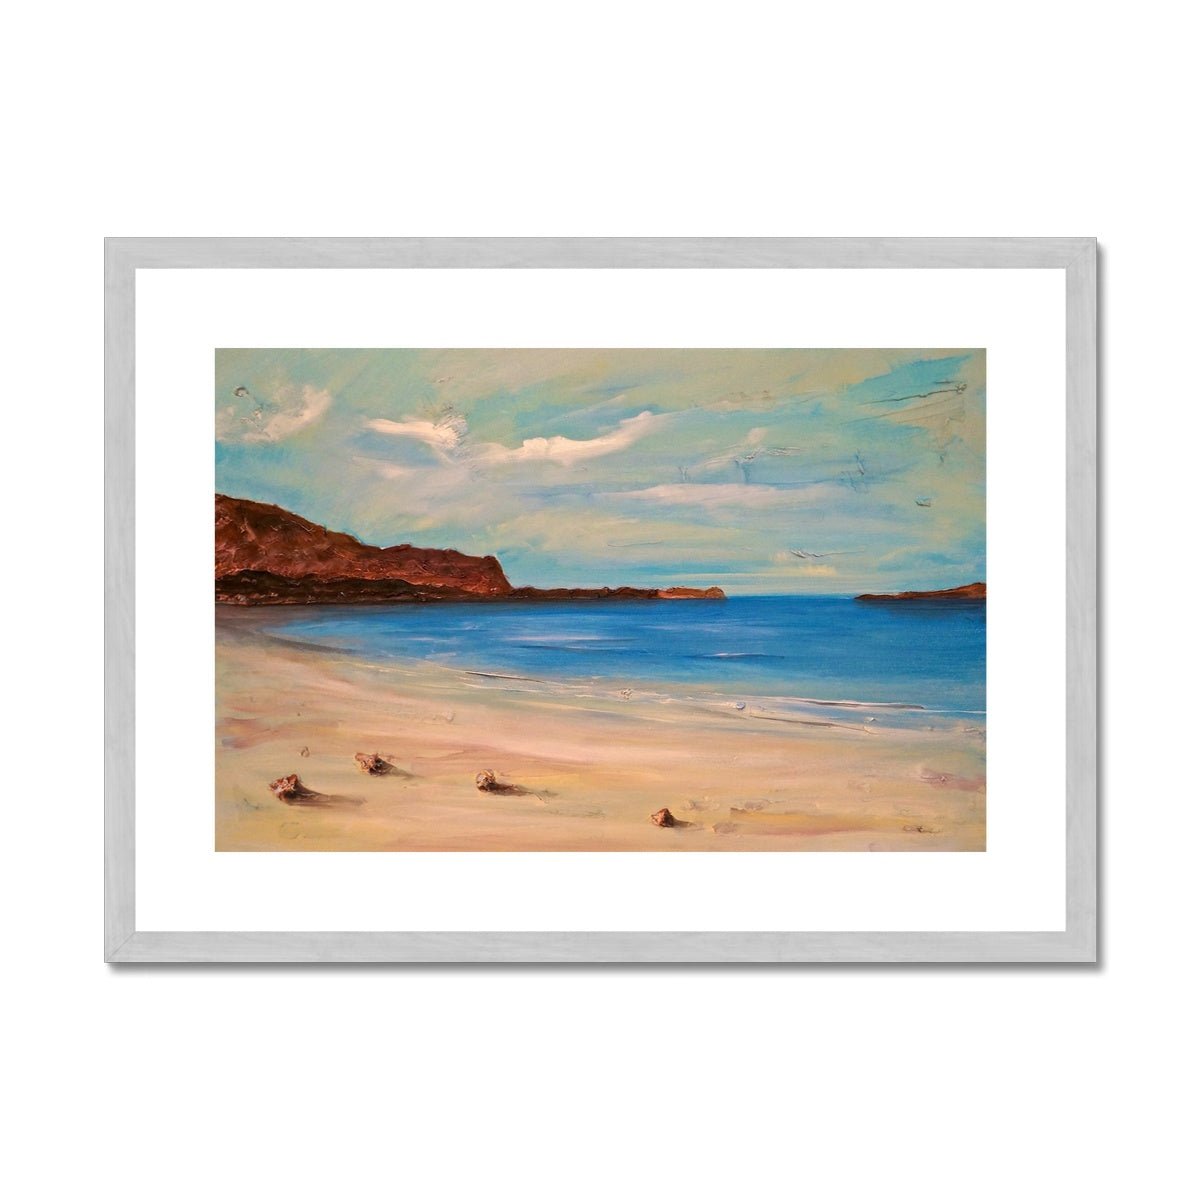 Bosta Beach Lewis Painting | Antique Framed & Mounted Prints From Scotland-Antique Framed & Mounted Prints-Hebridean Islands Art Gallery-A2 Landscape-Silver Frame-Paintings, Prints, Homeware, Art Gifts From Scotland By Scottish Artist Kevin Hunter